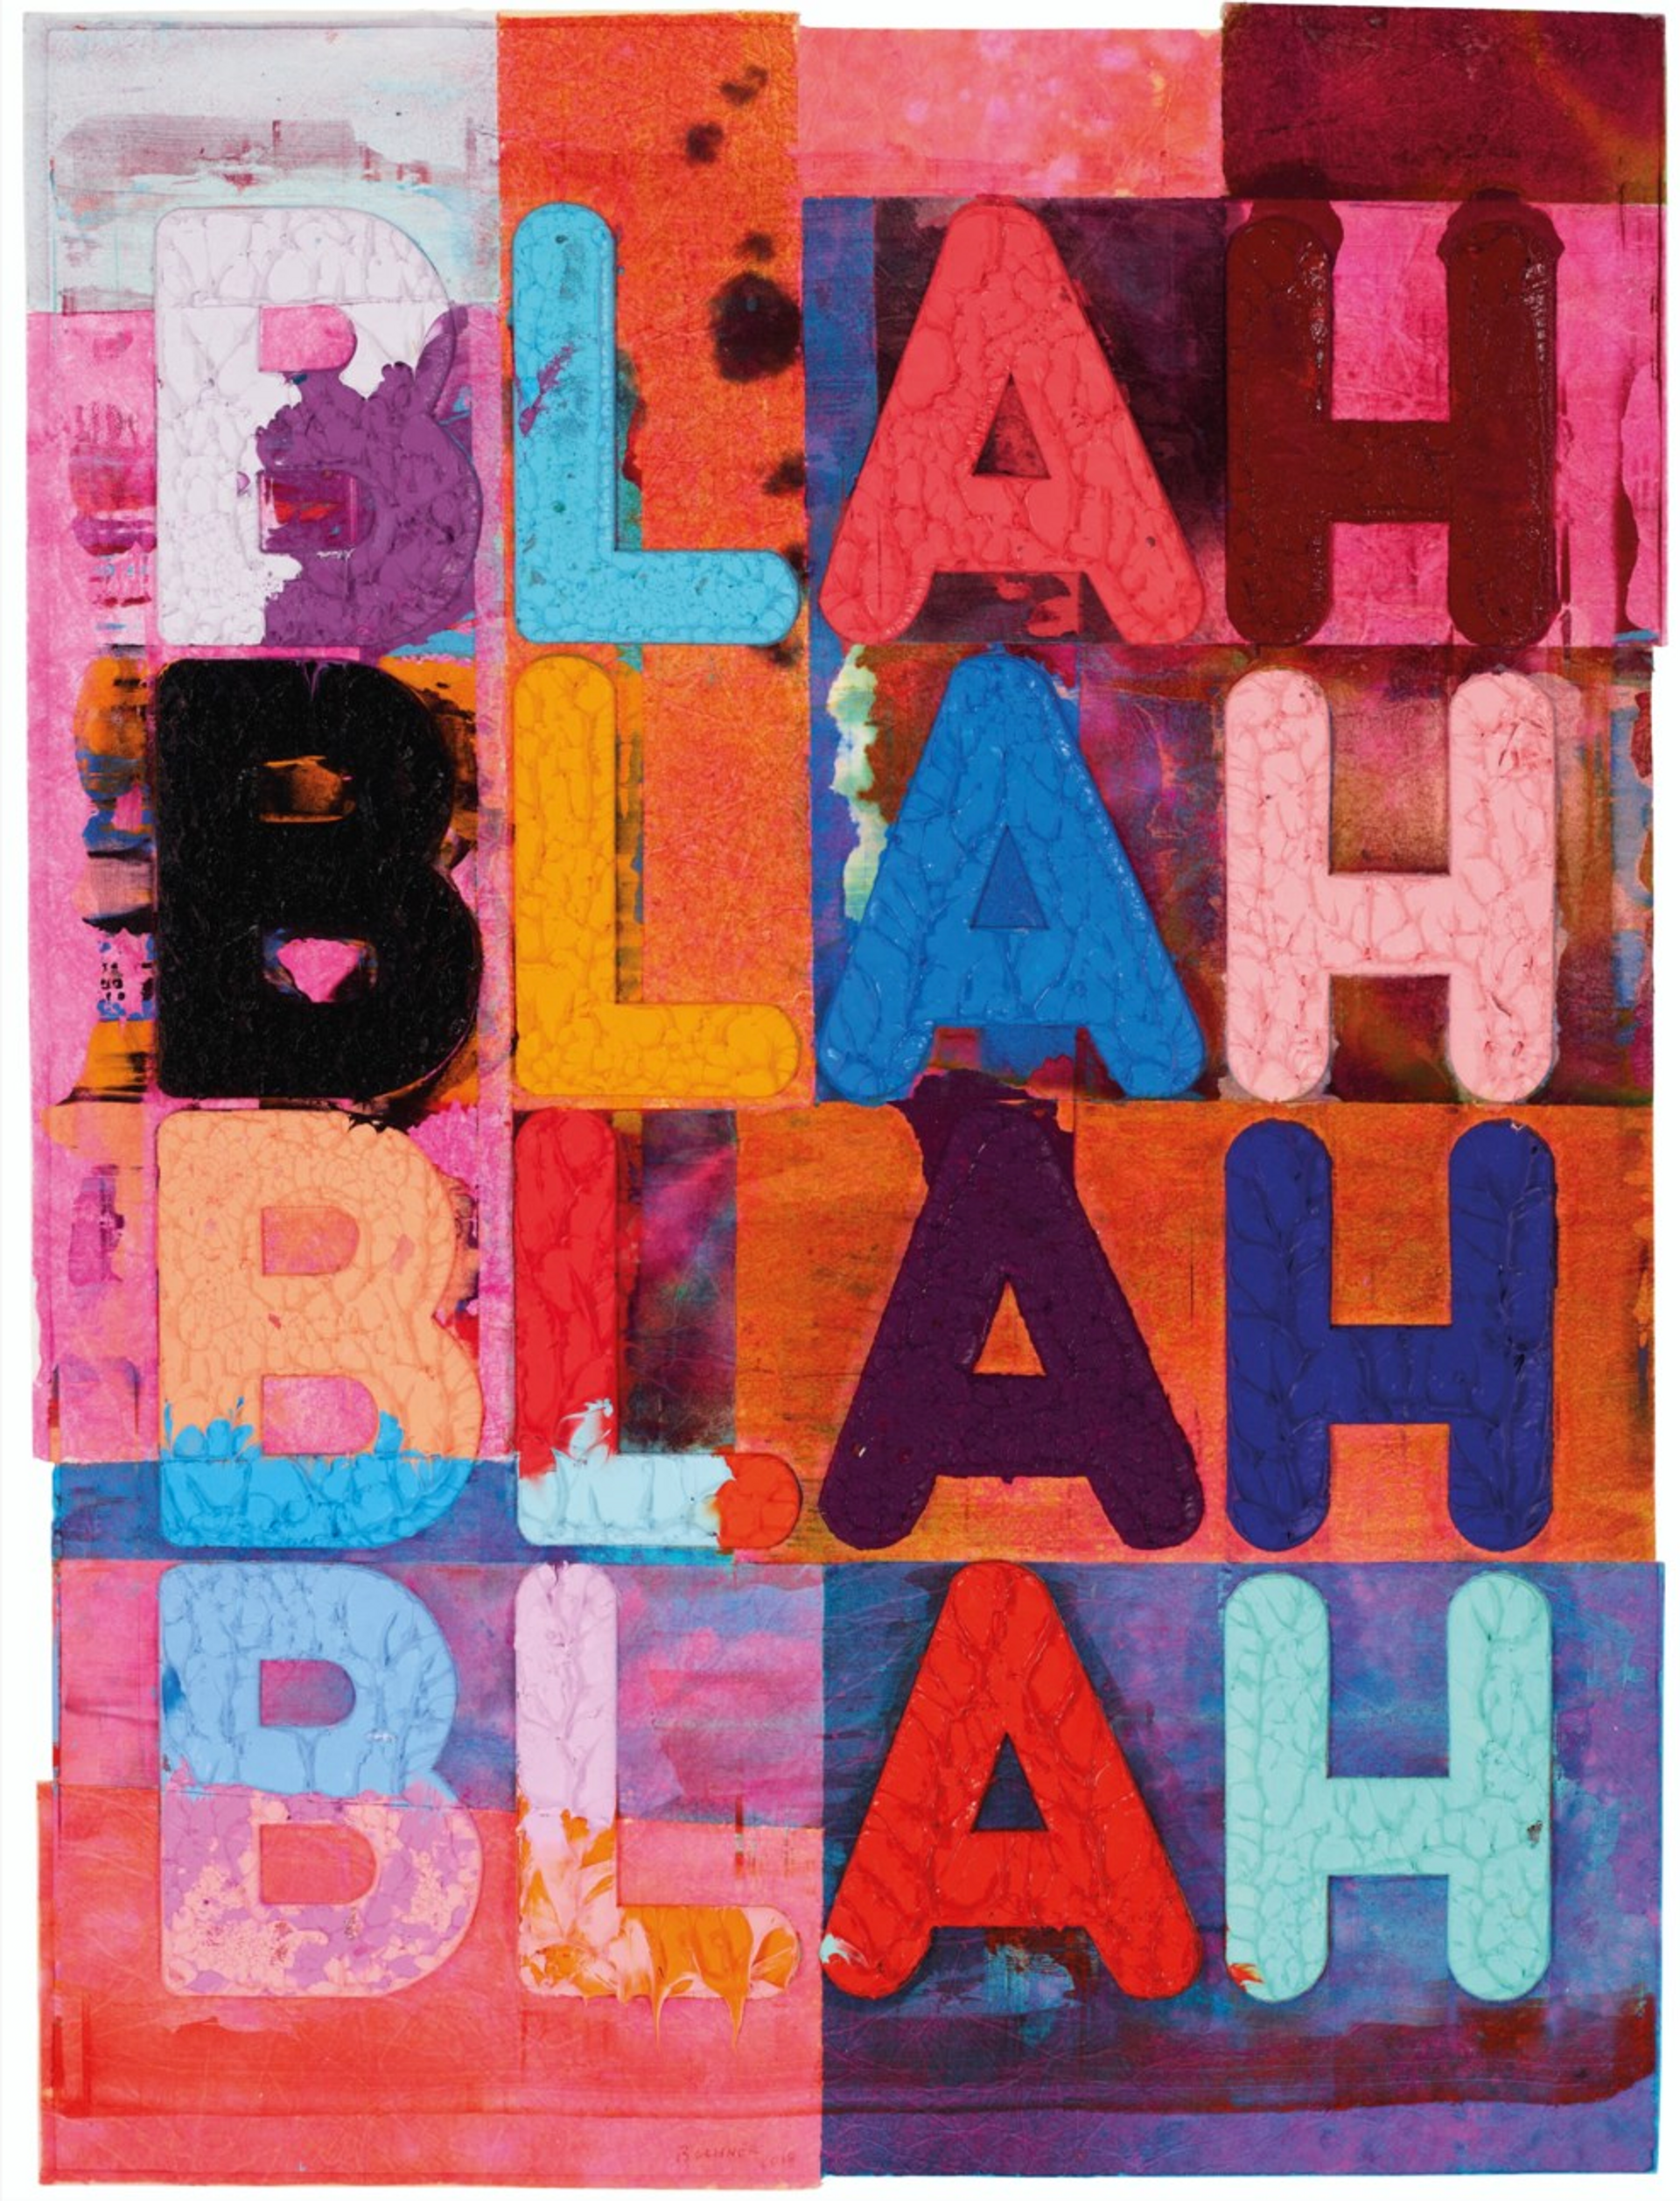 A vibrant abstract artwork by Mel Bochner featuring the repetition of the word "BLAH" stacked four times.